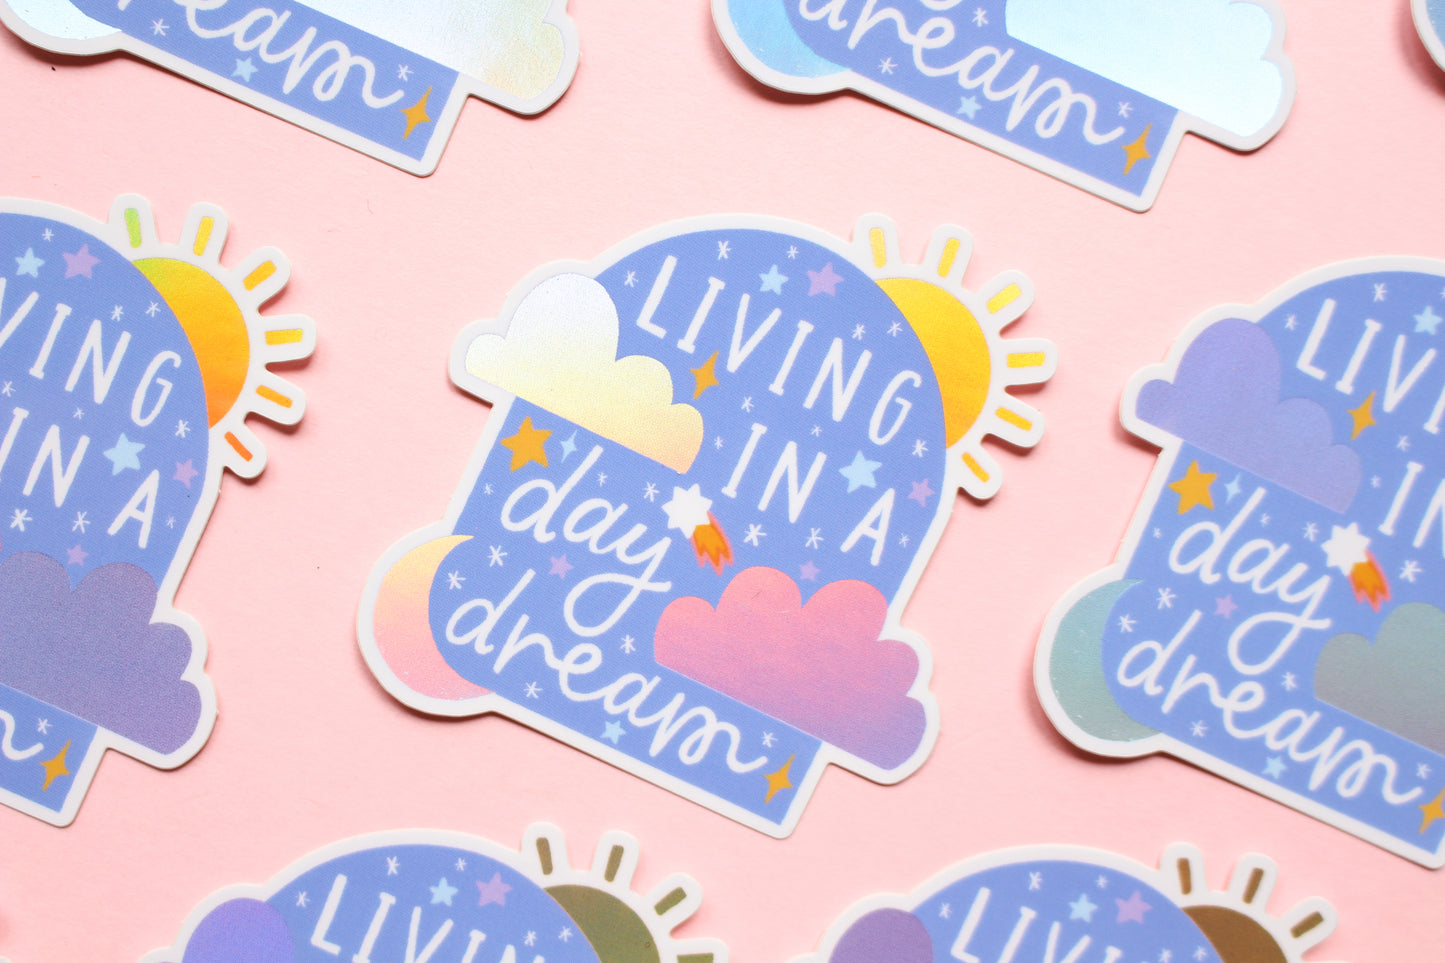 HS Daydreaming Holographic Vinyl Sticker